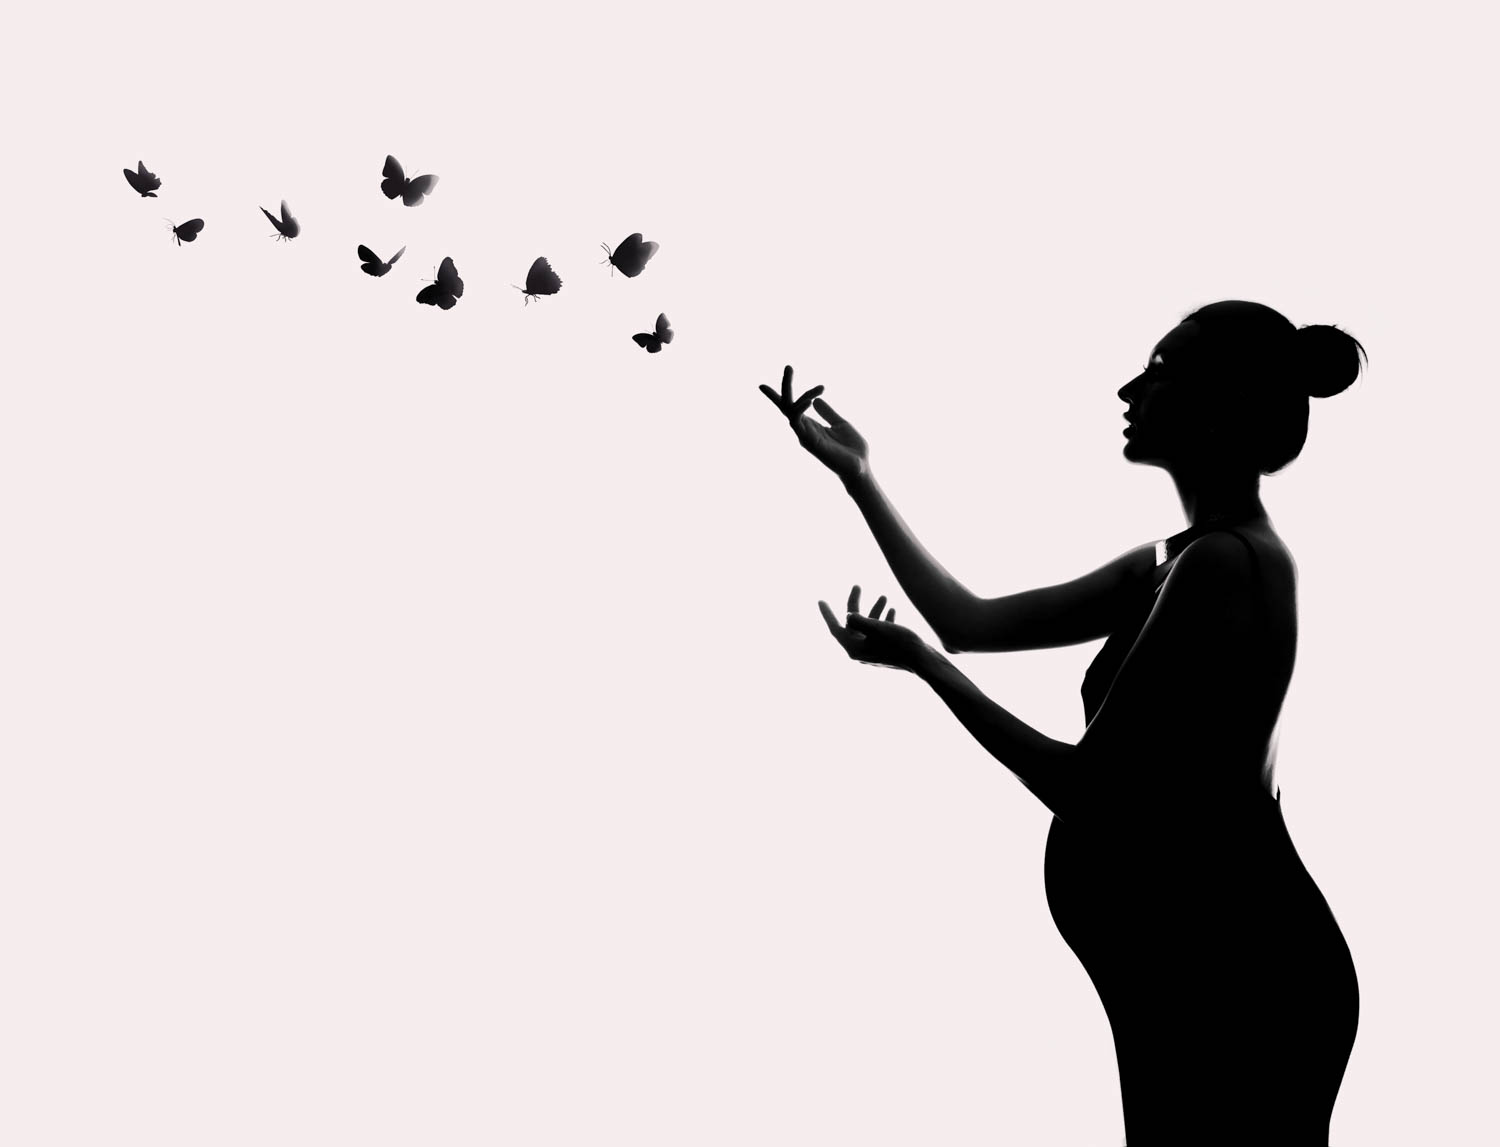 NYC maternity portrait with butterflies on pink background, silhouette